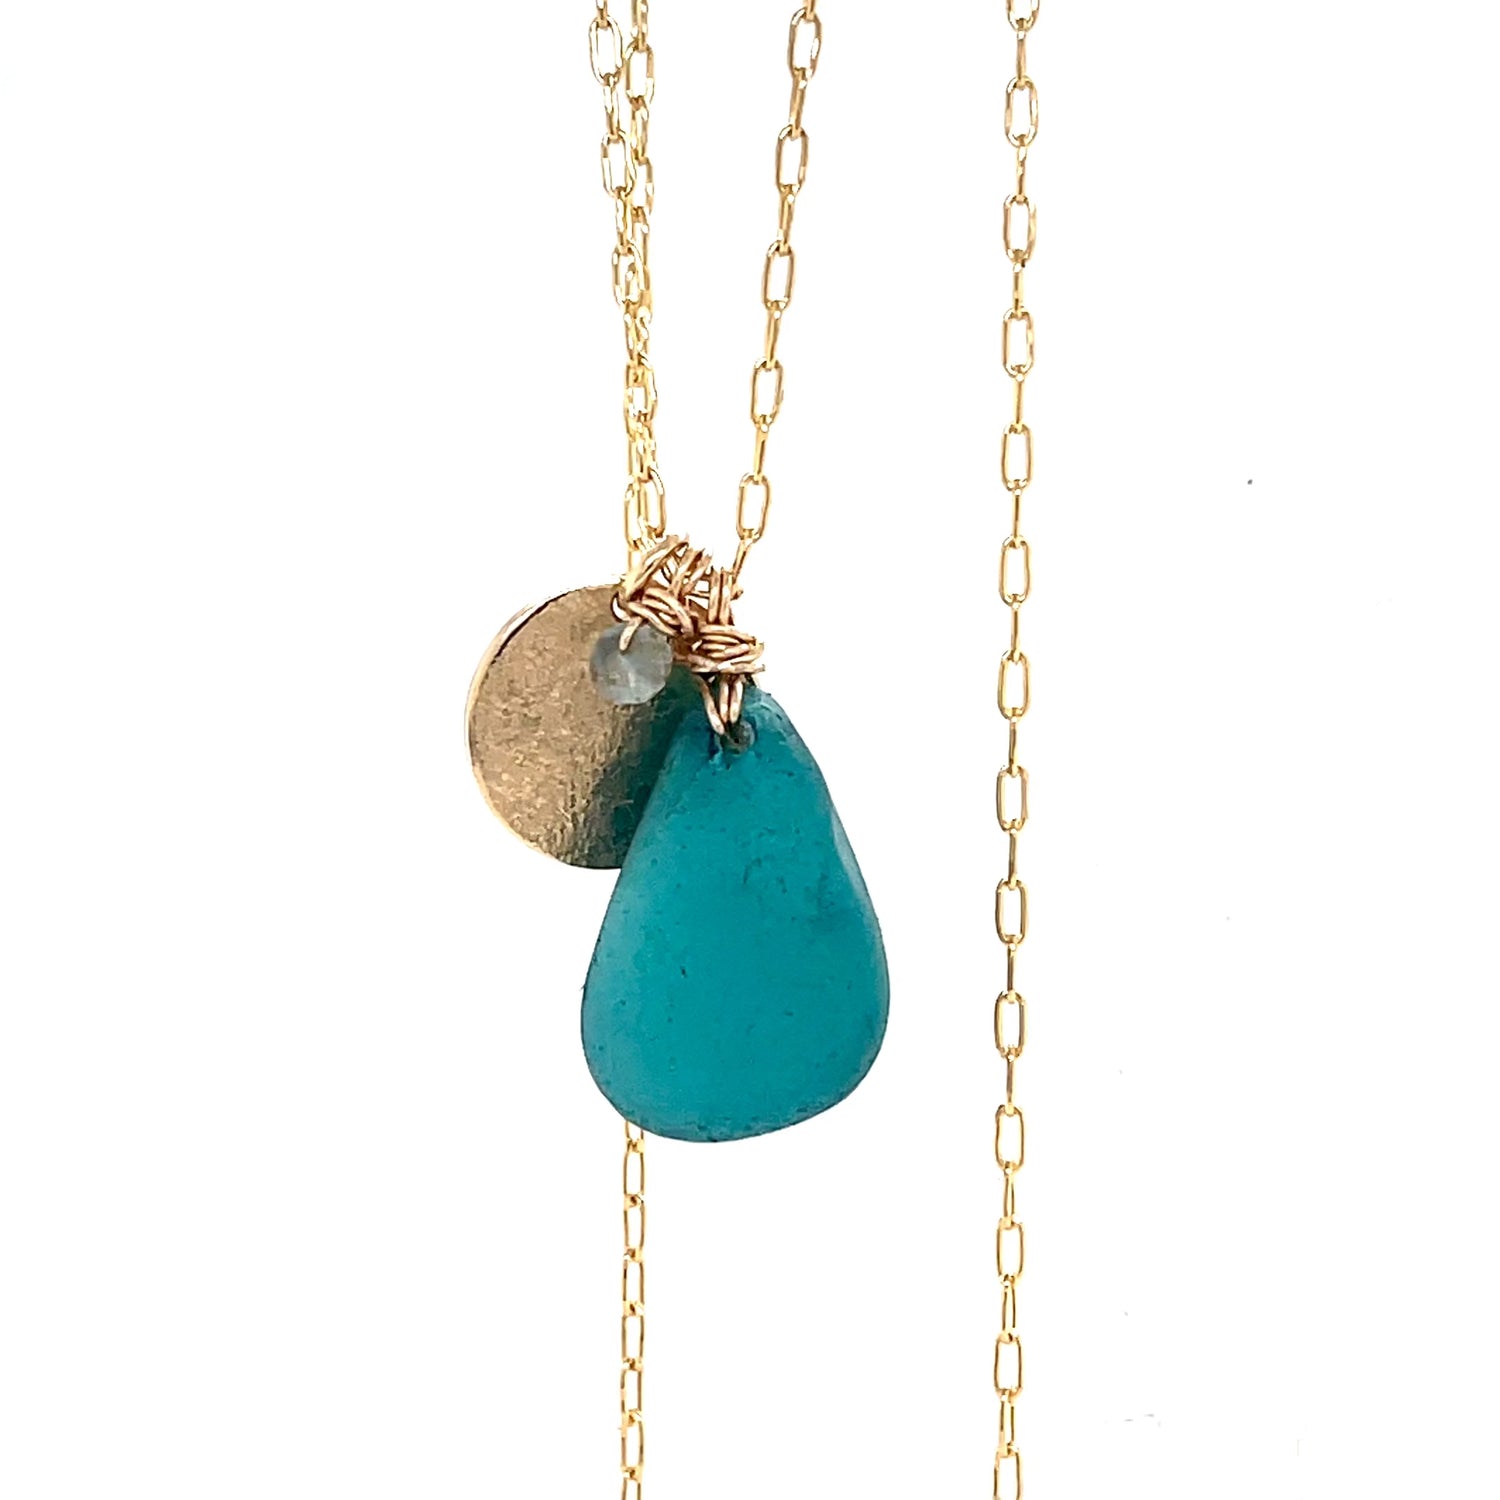 Teal Gold Disc Necklace - Sea Glass Necklace - Teal Gold Necklace